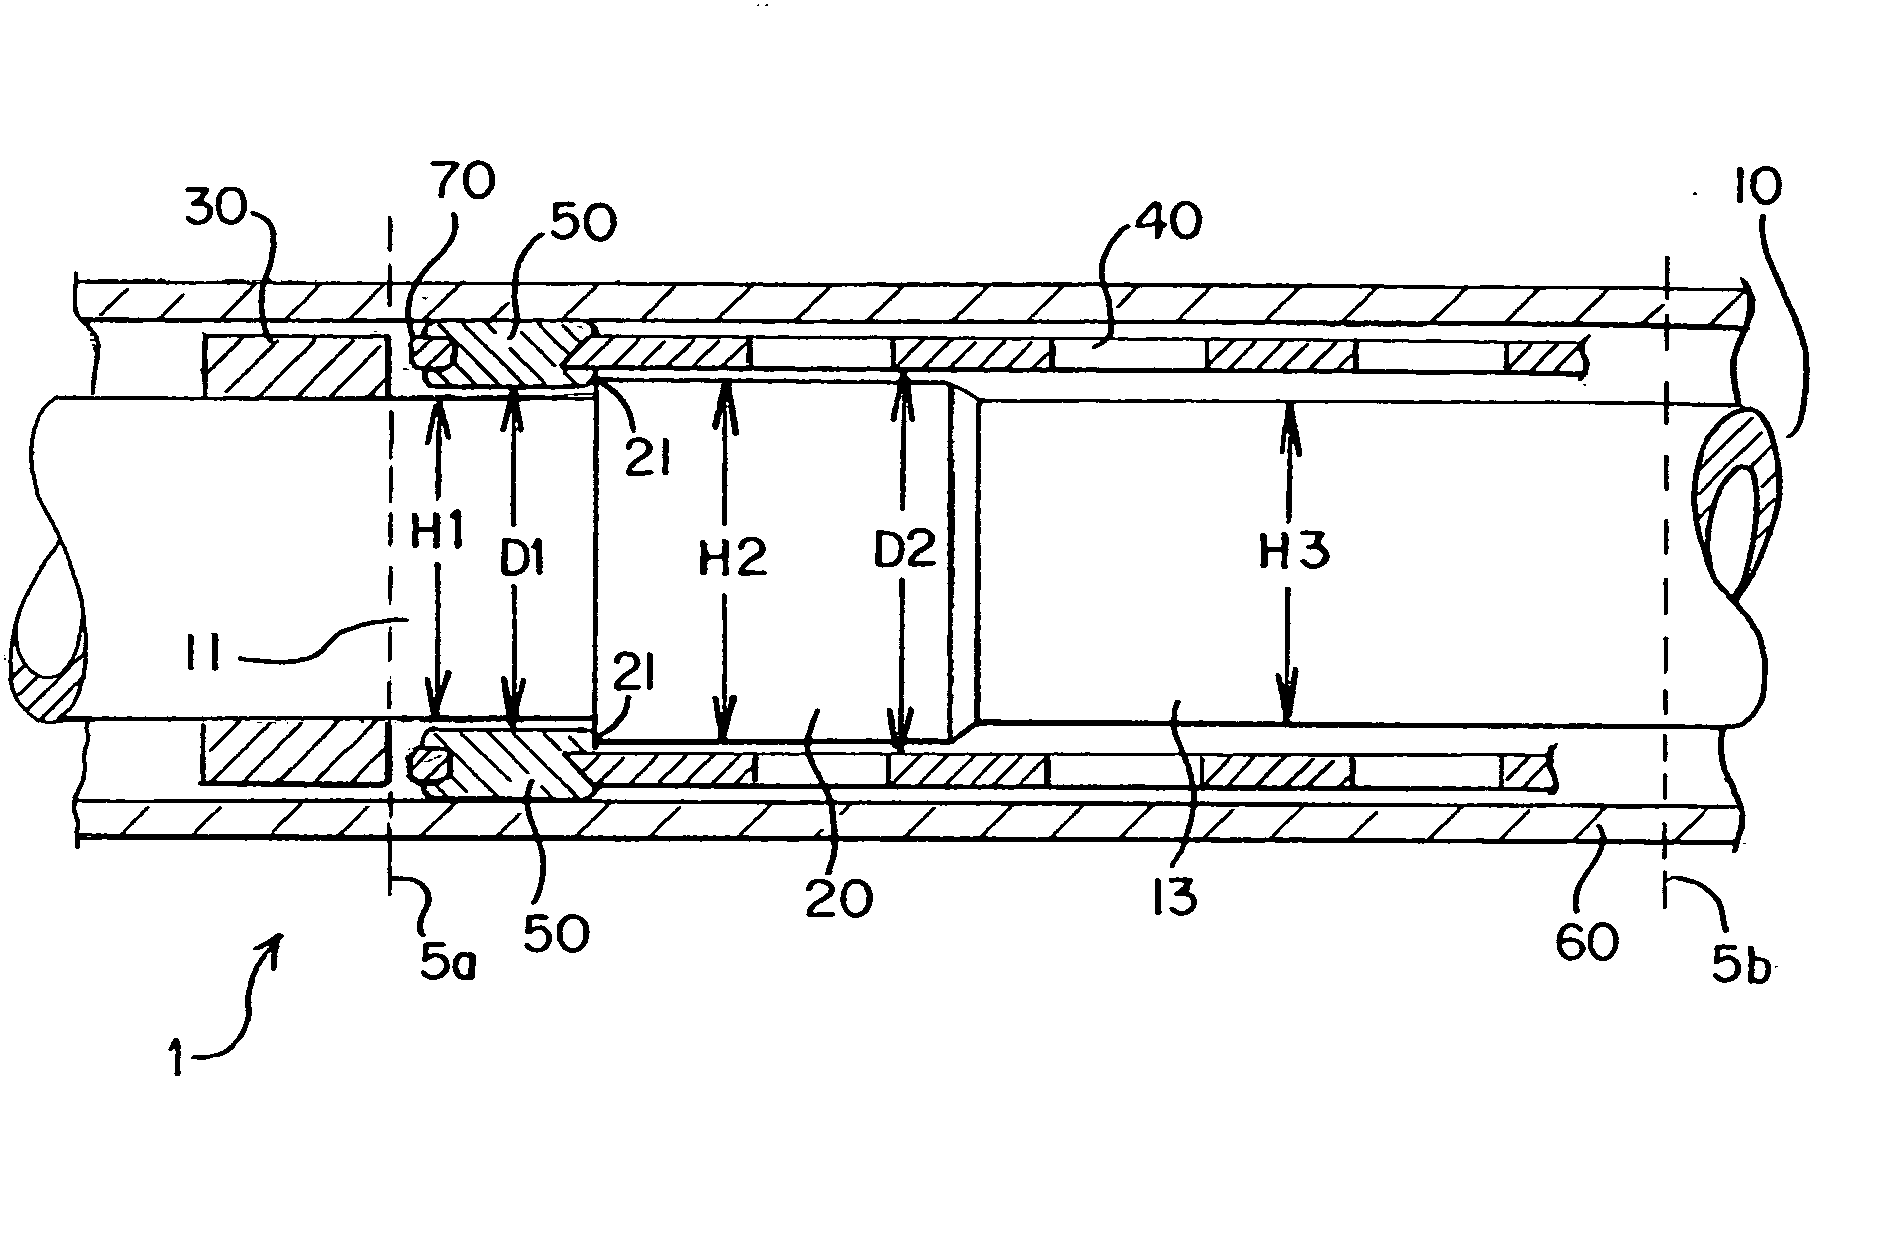 Stent delivery system allowing controlled release of a stent